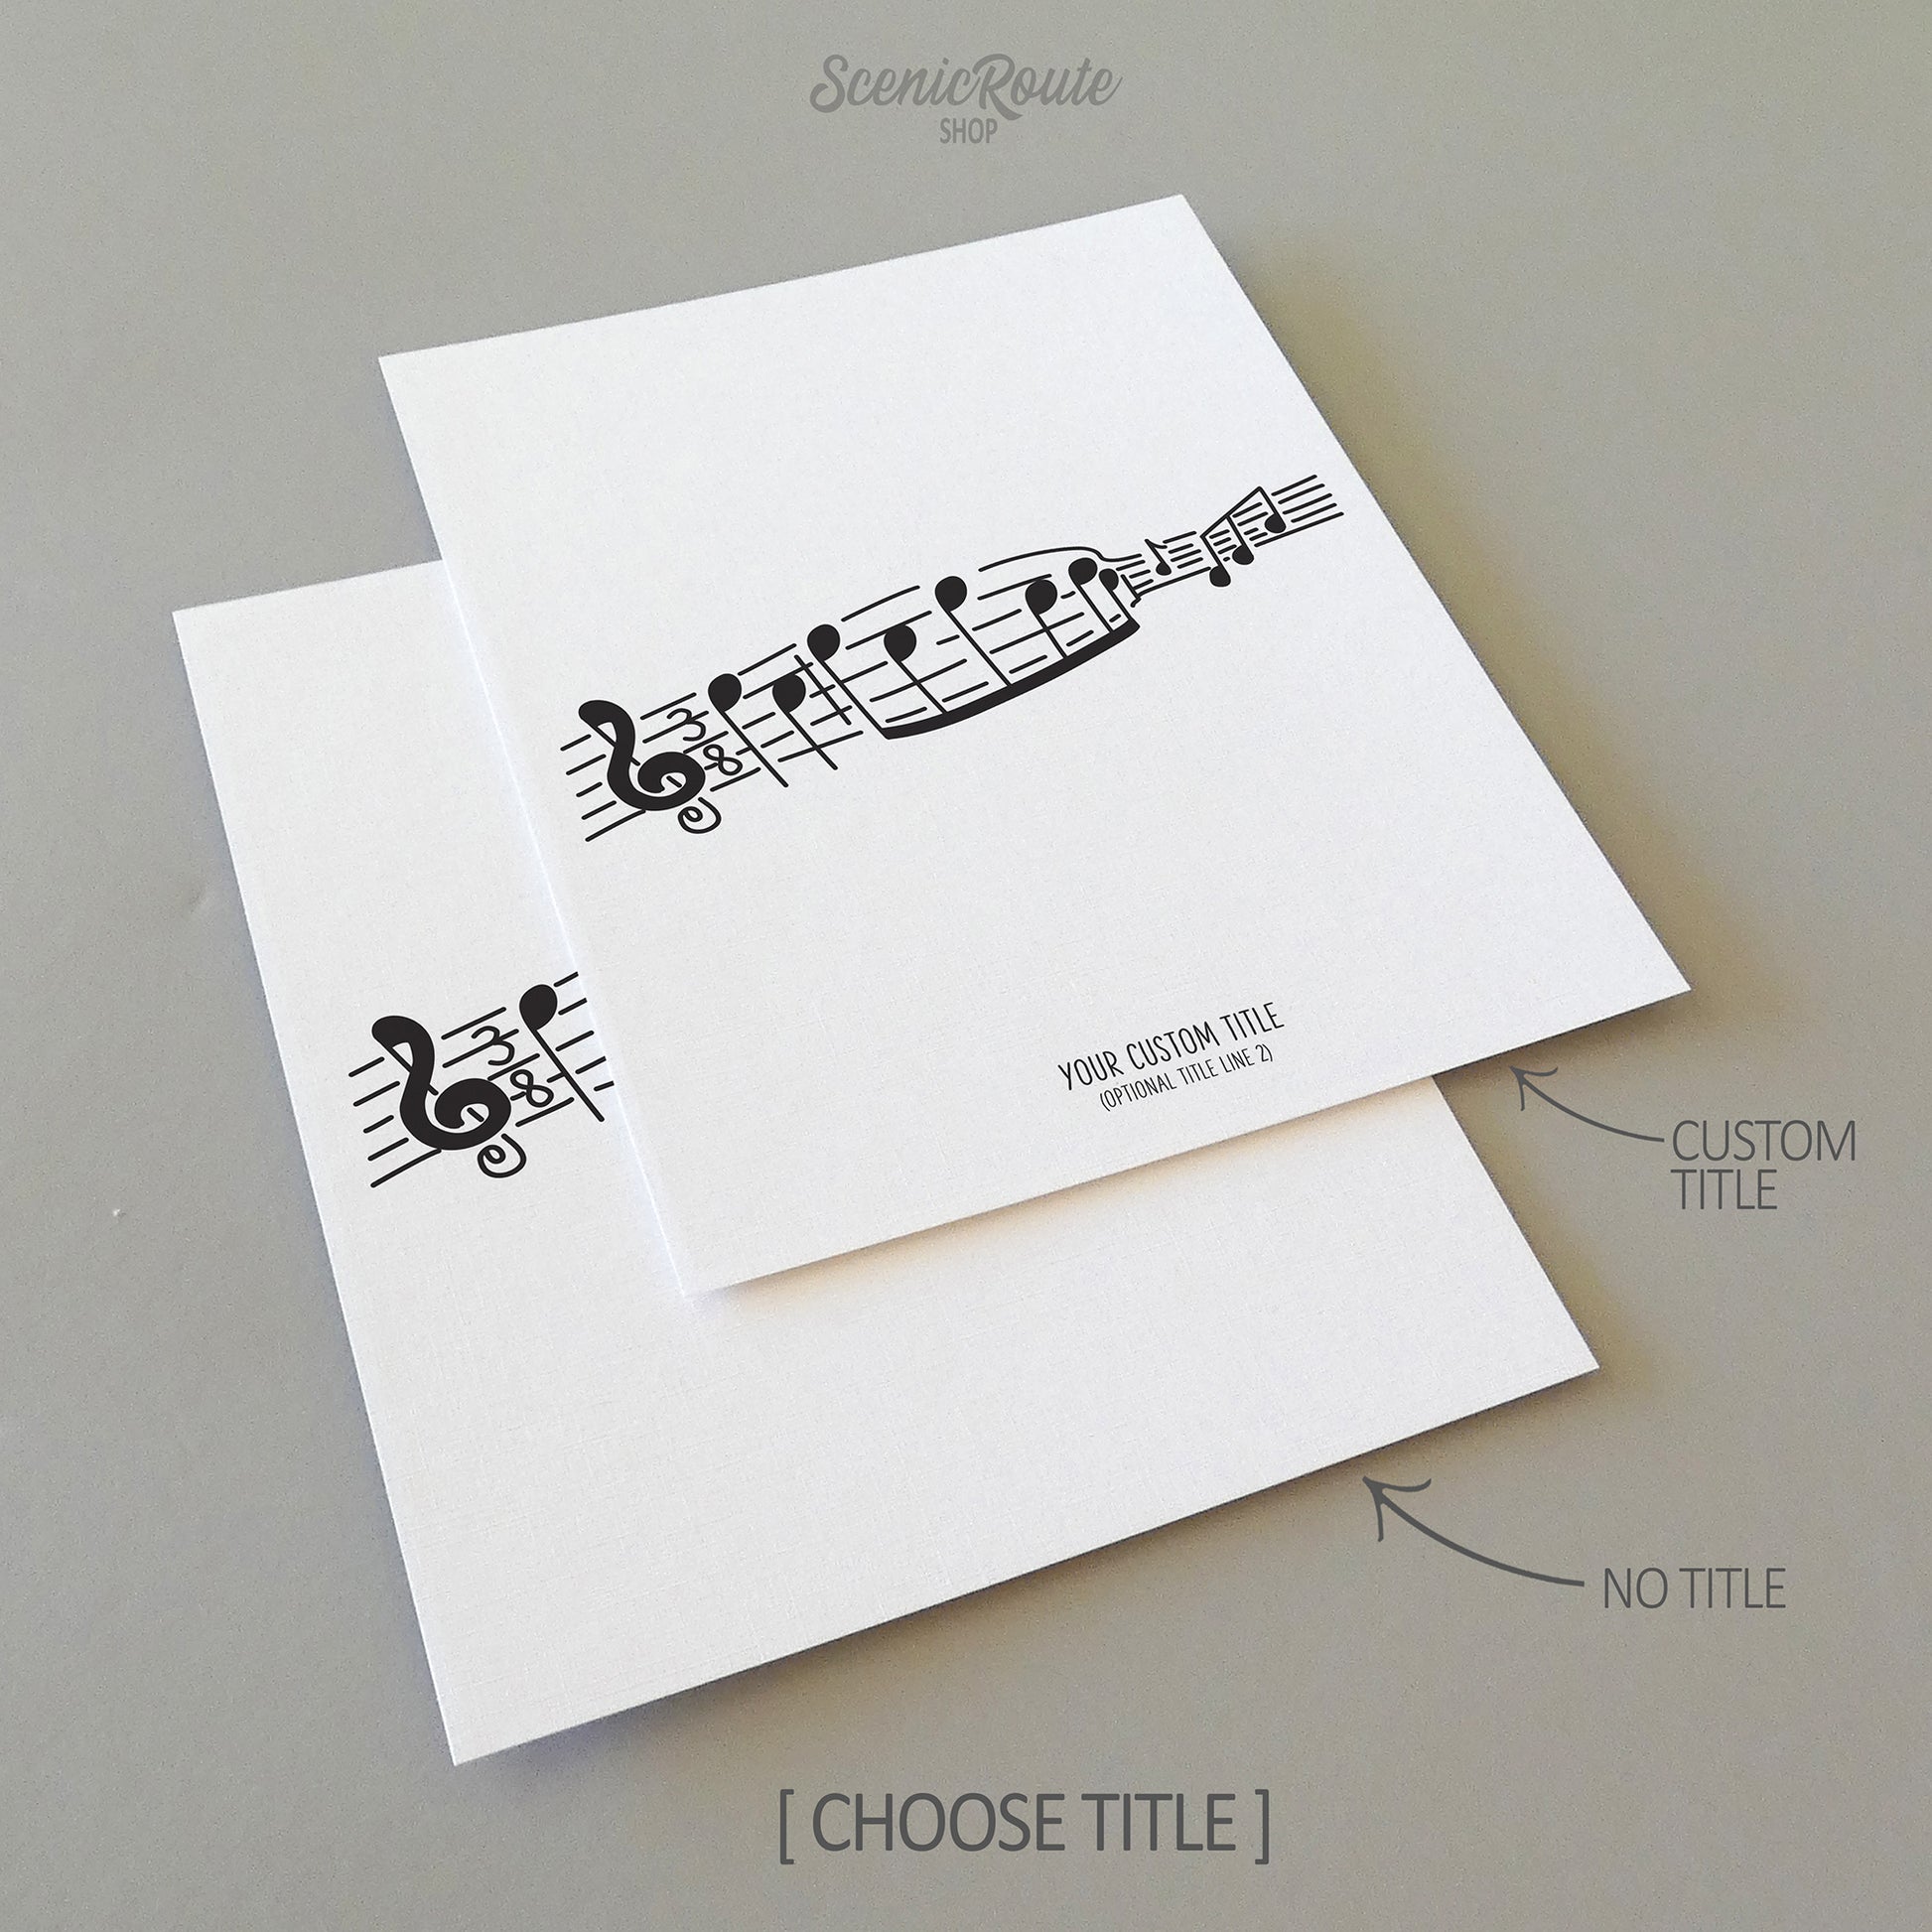 Two line art drawings of a Music Notes Stanza on white linen paper with a gray background.  The pieces are shown with “No Title” and “Custom Title” options for the available art print options.